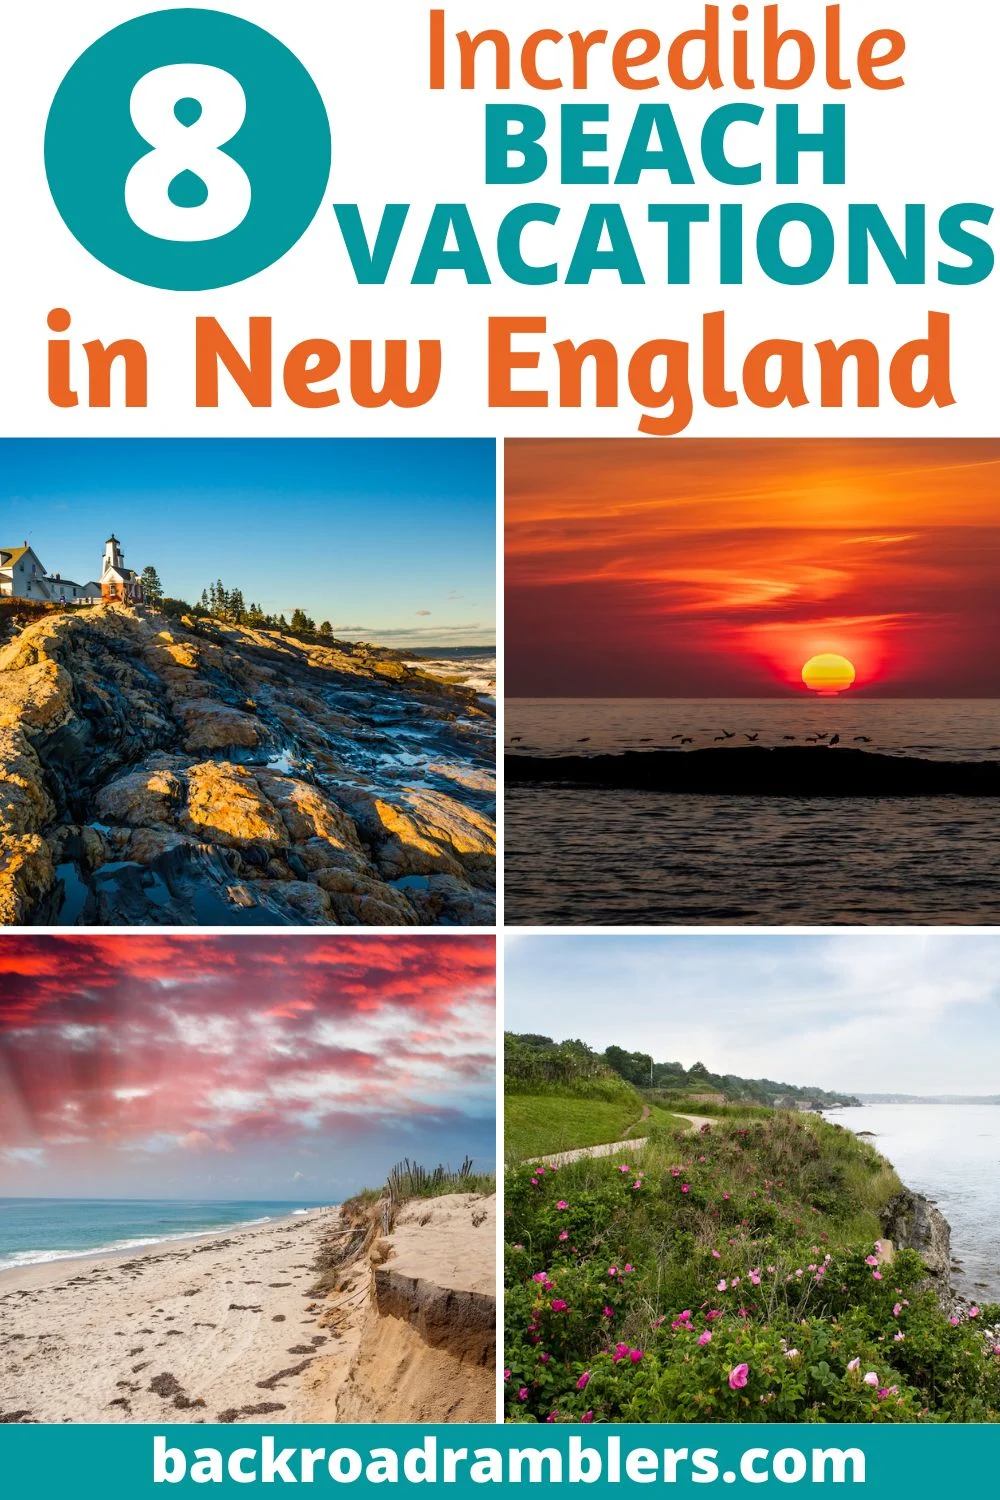 beach scenes in New England with text overlay - 8 Incredible Beach Vacations in New England.